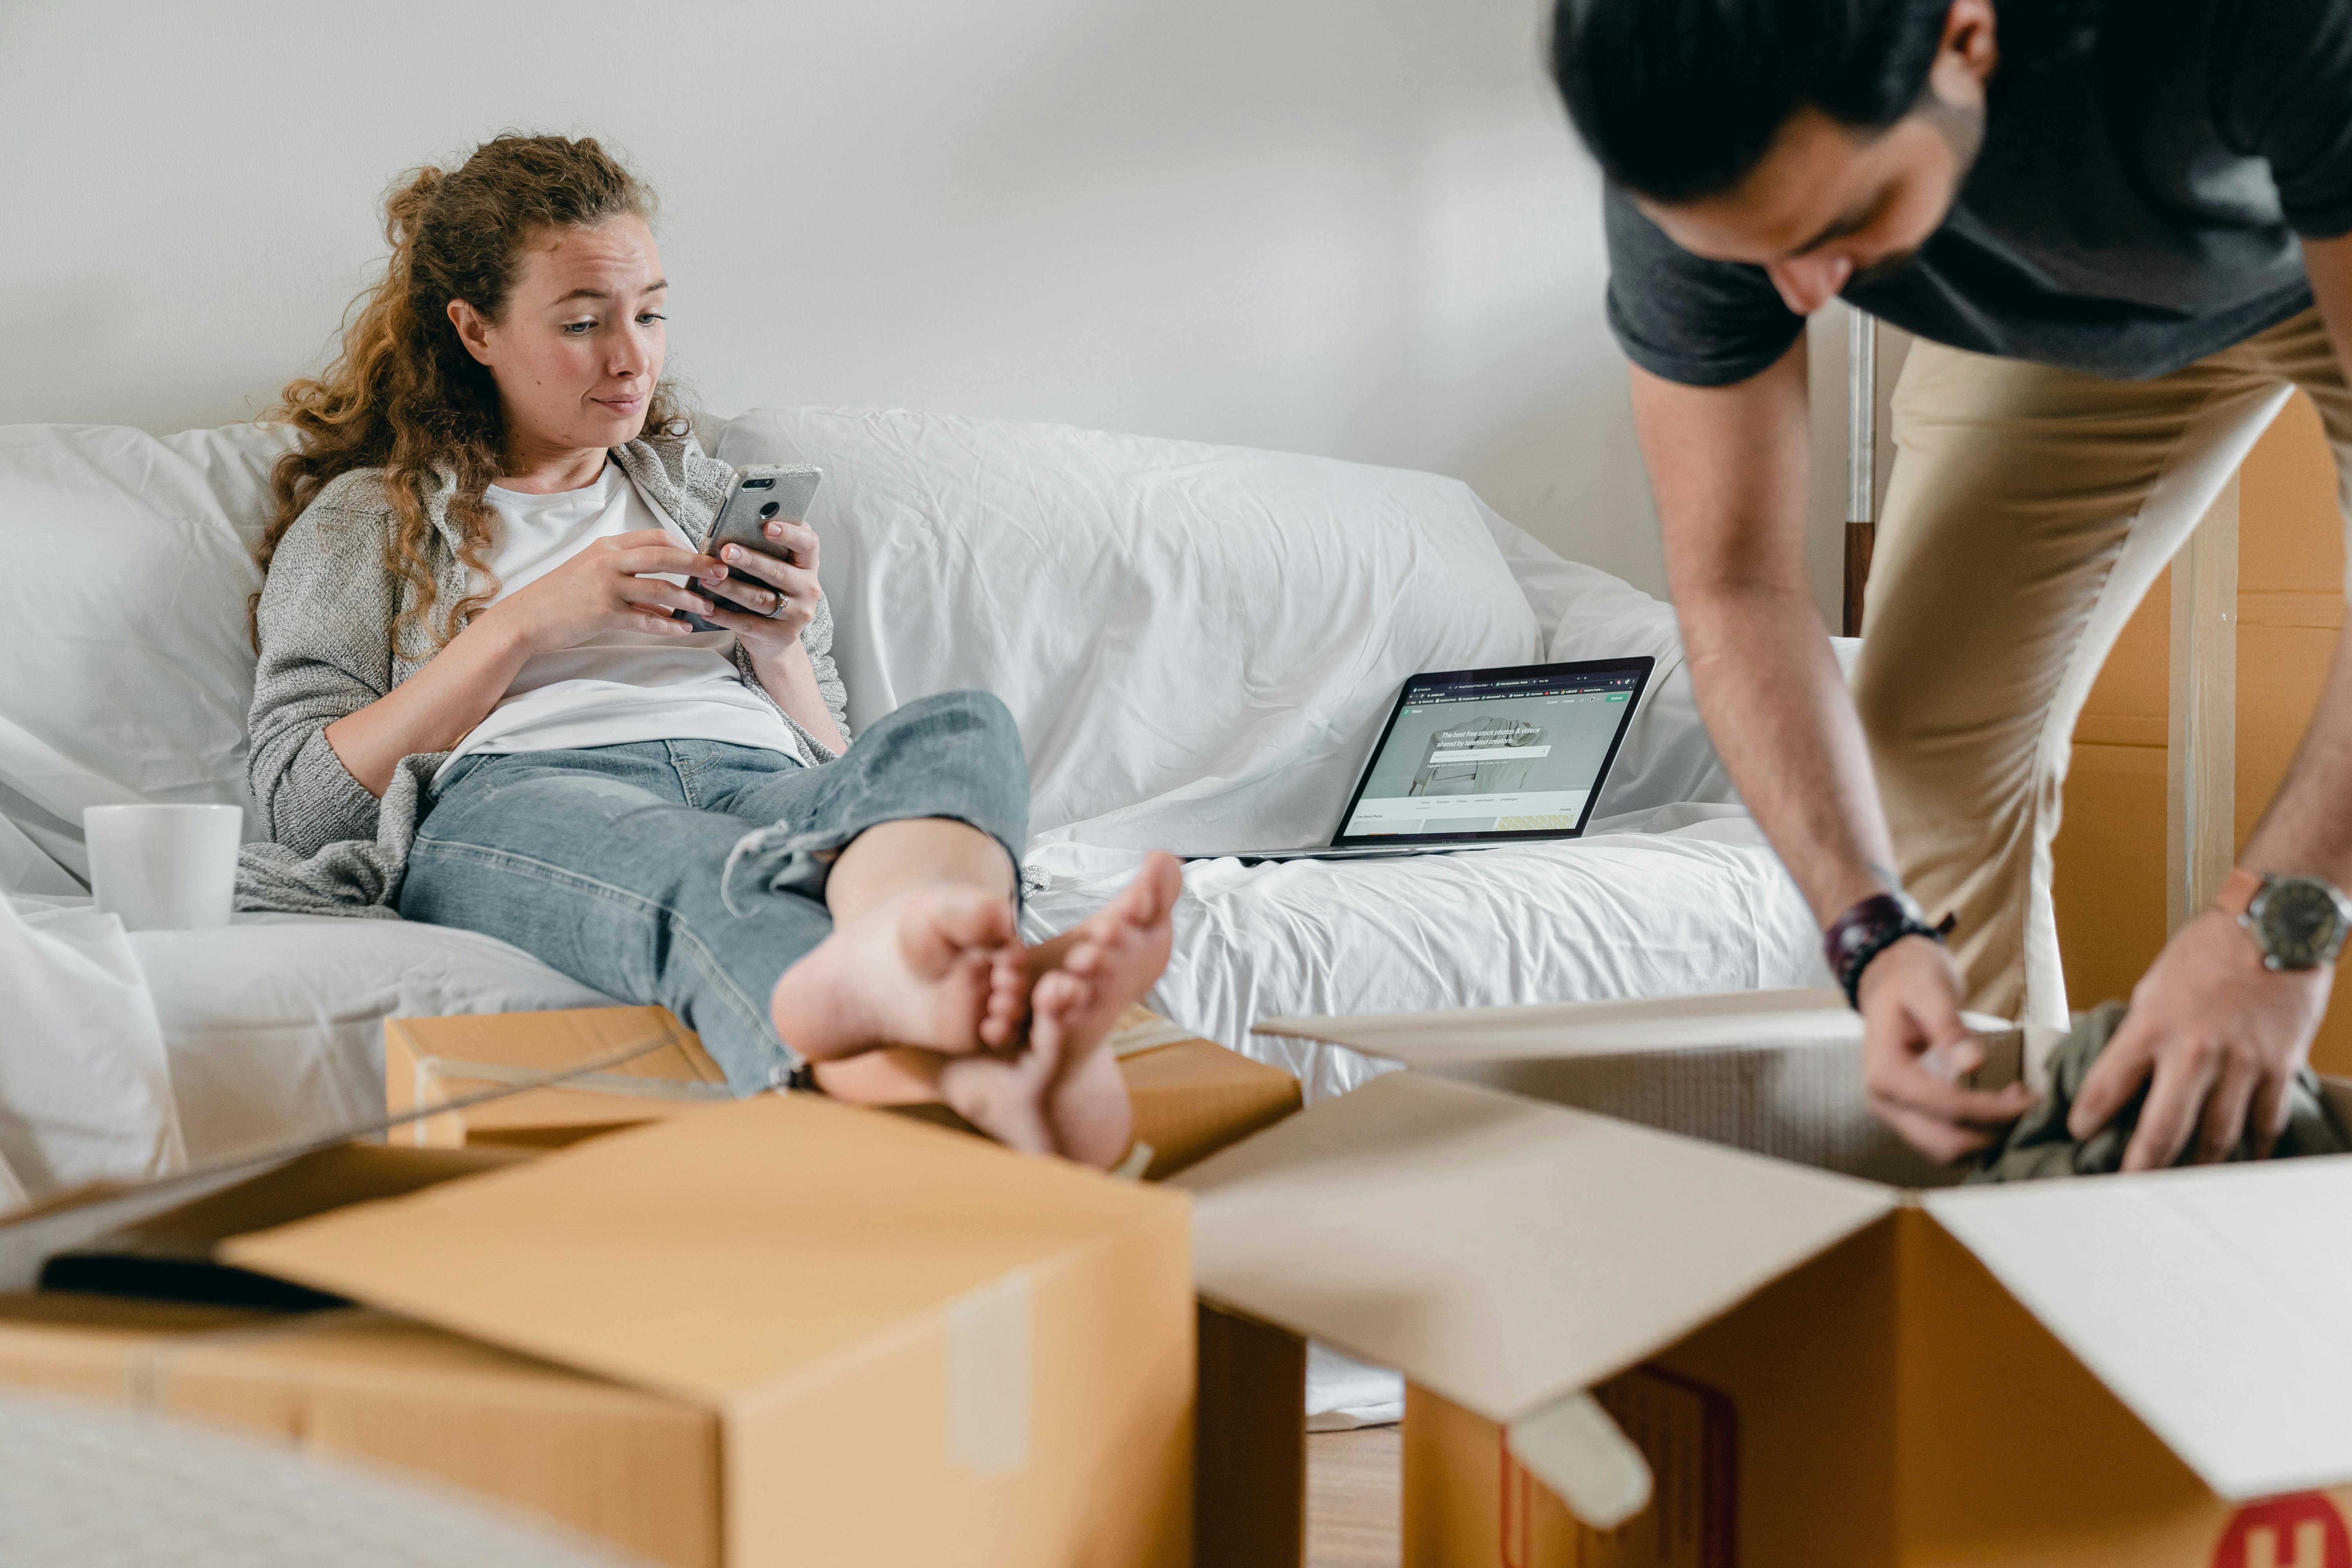 woman chatting on smartphone while ethnic boyfriend unpacking boxes